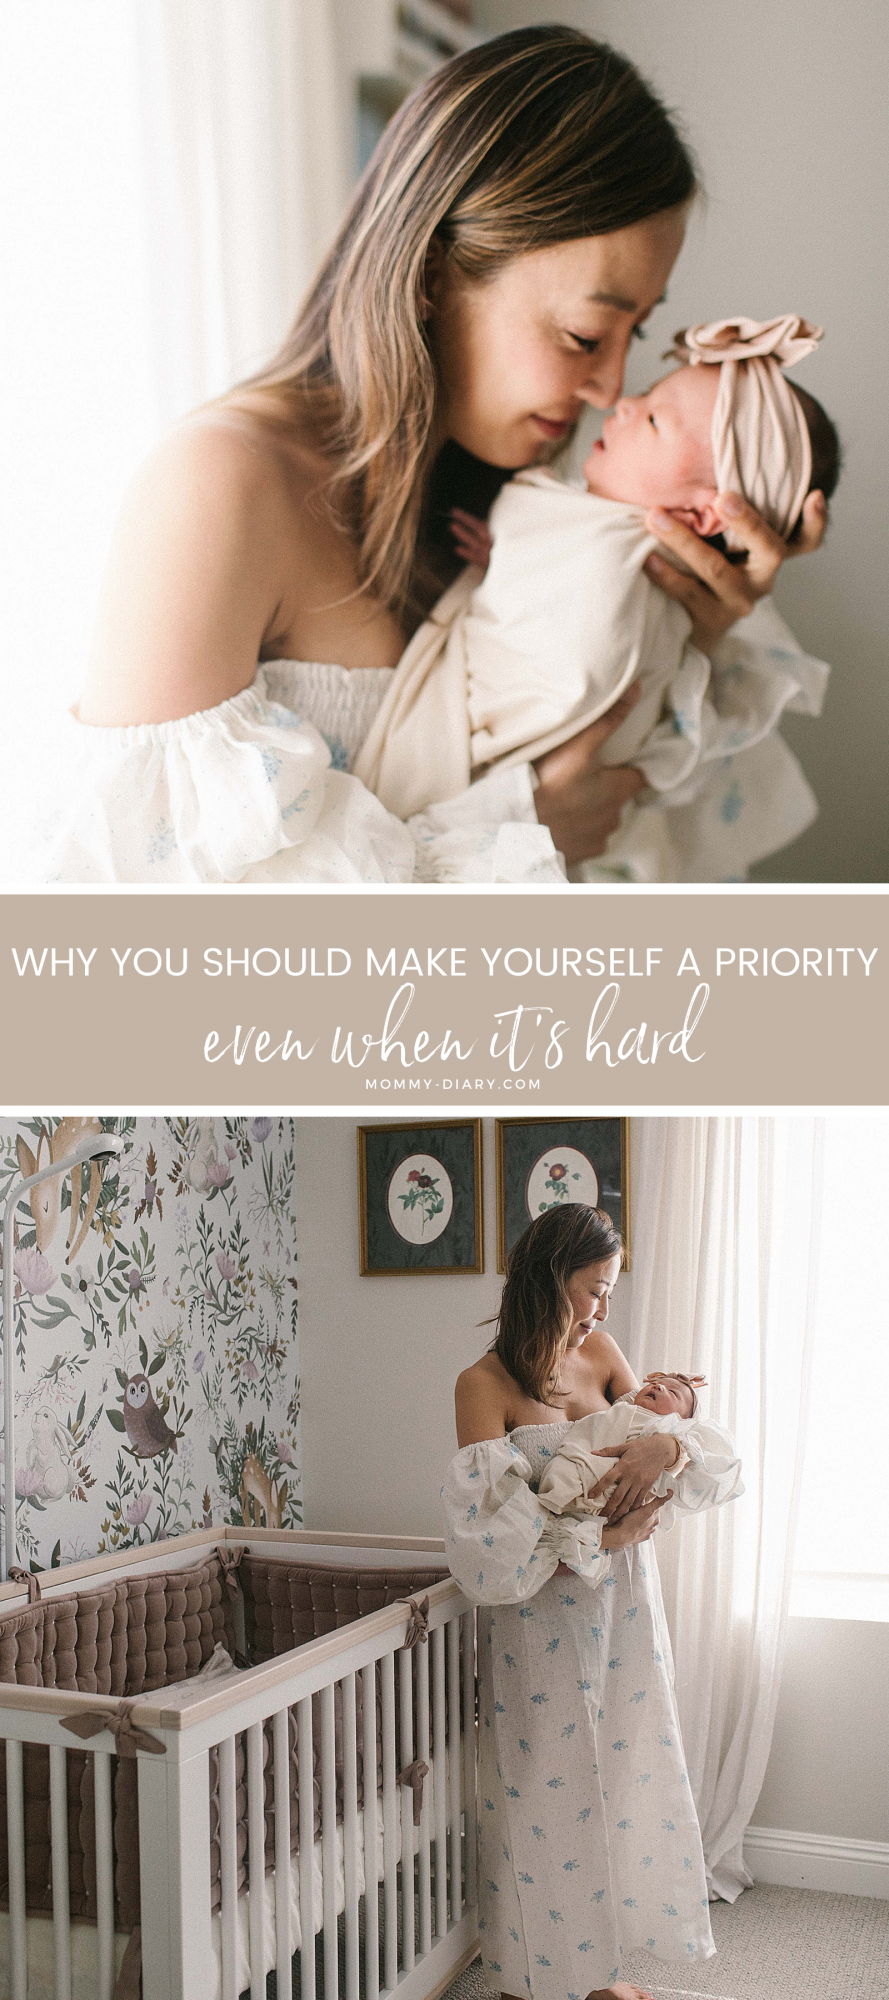 Why You Should Make Yourself a Priority